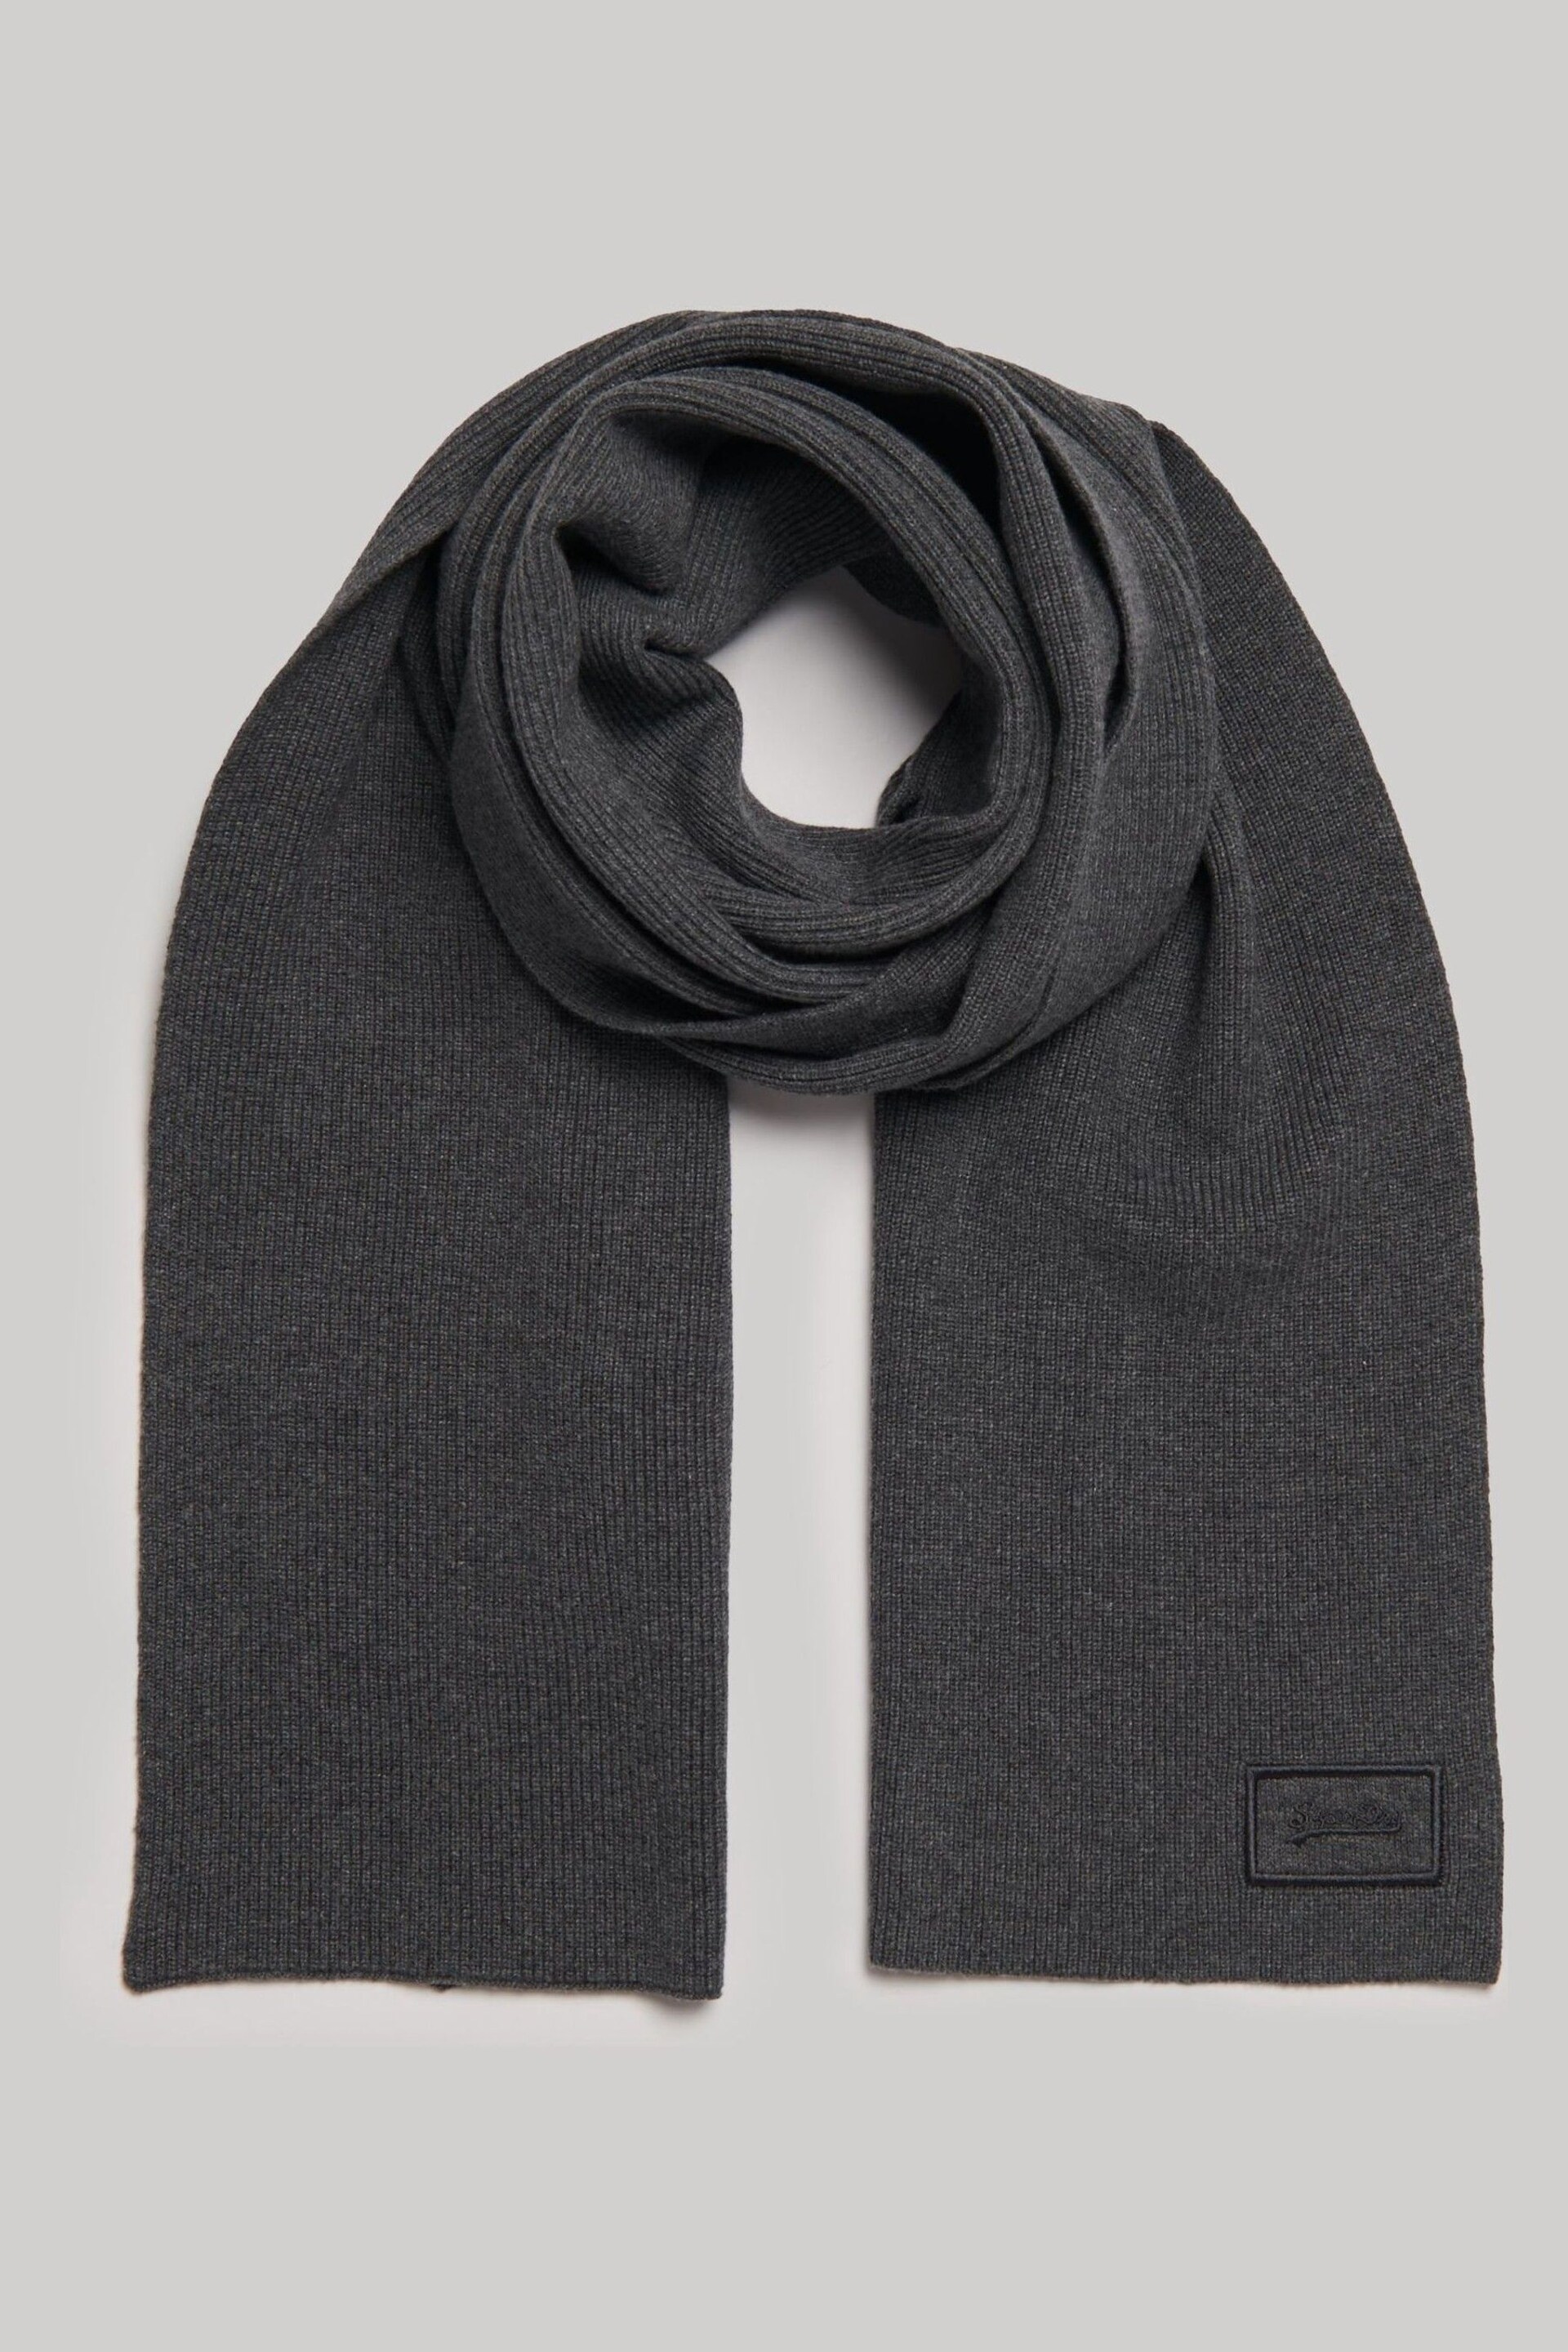 Superdry Grey Knitted Logo Scarf - Image 1 of 3